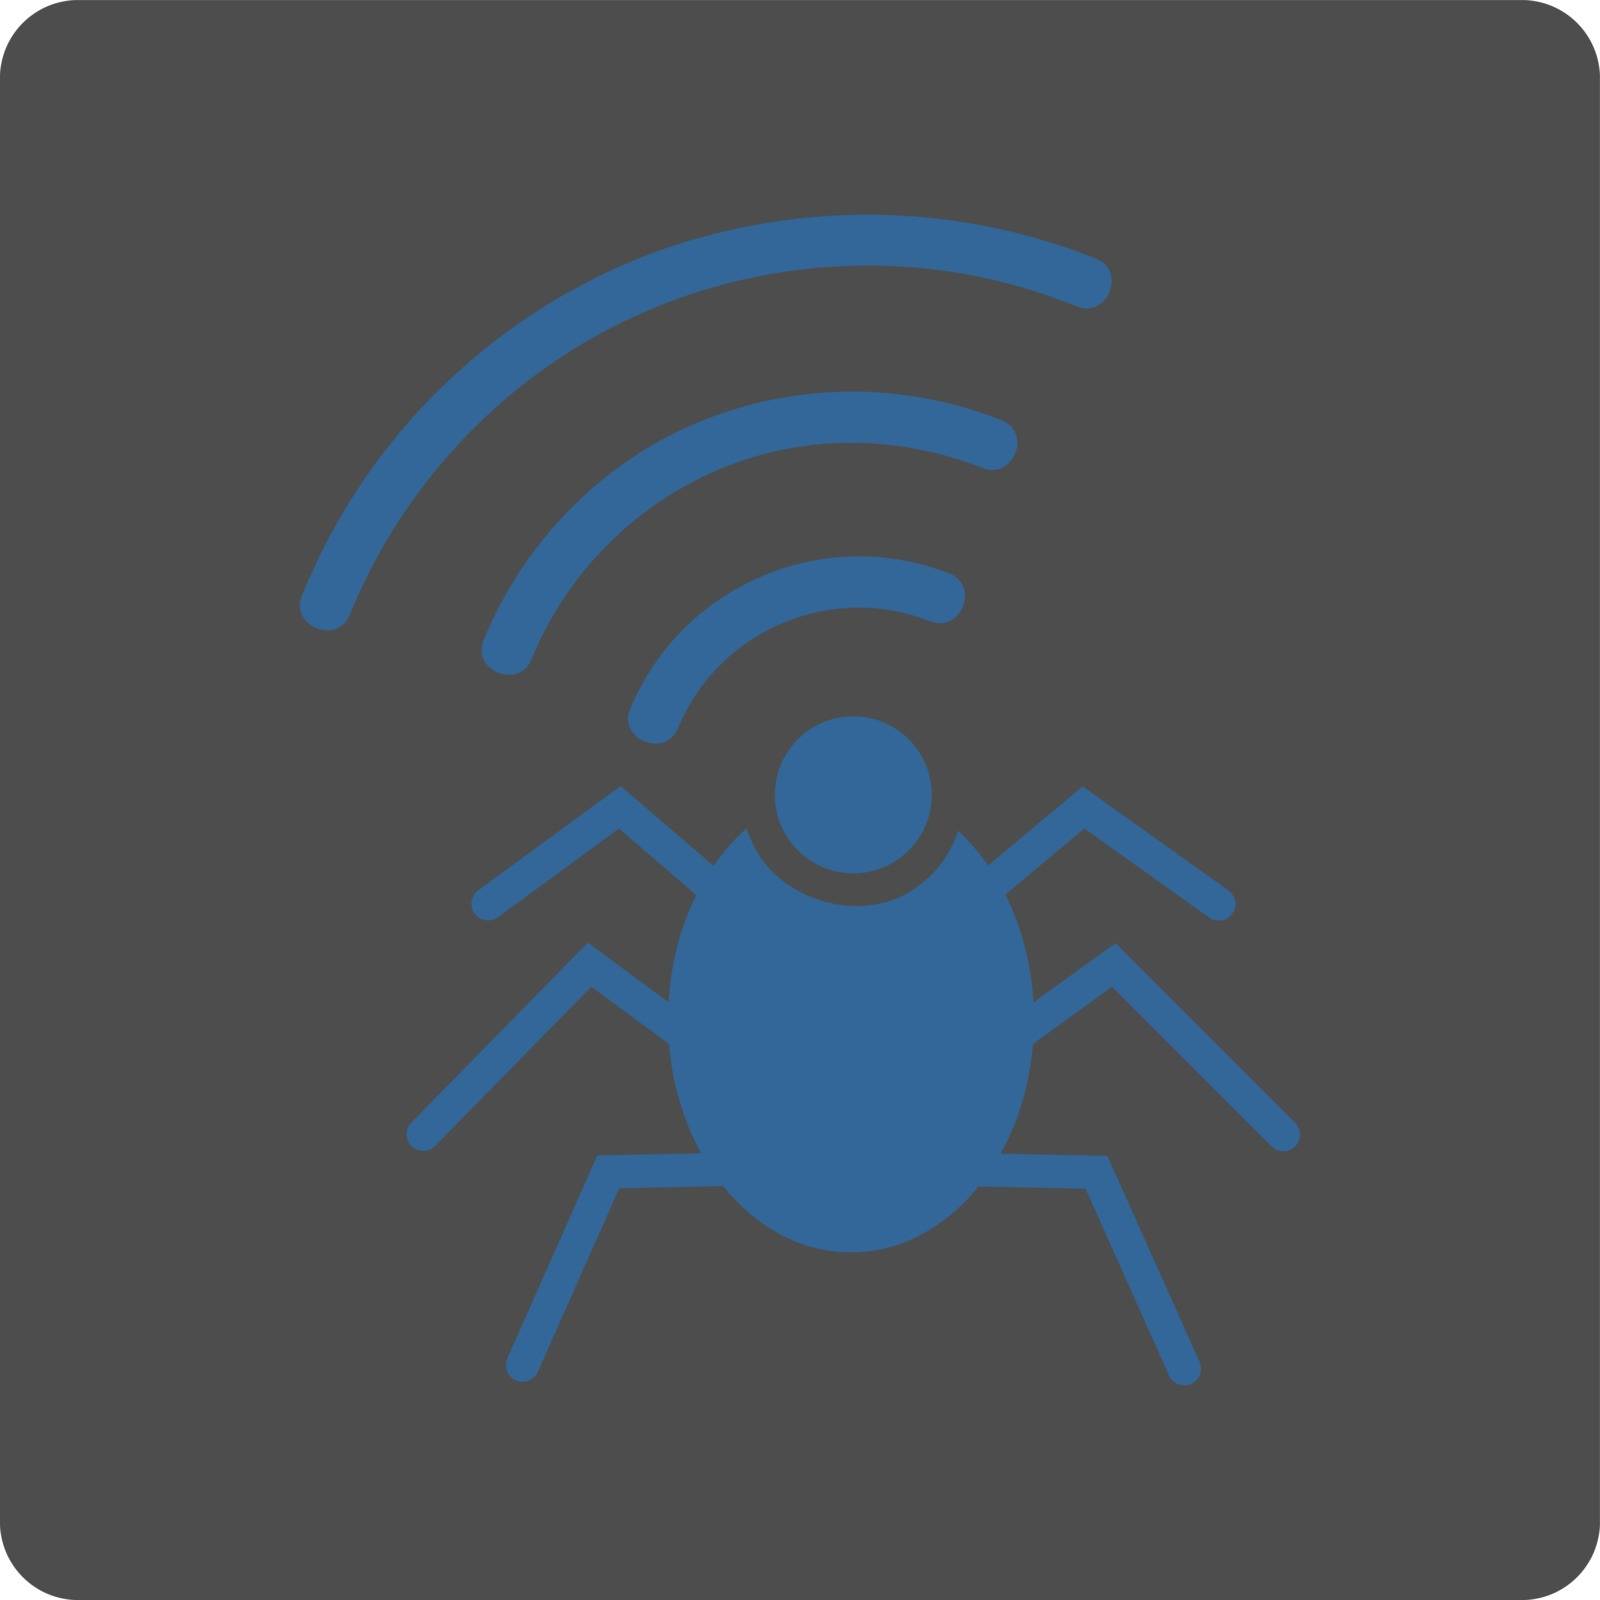 Radio spy bug icon. Vector style is cobalt and gray colors, flat rounded square button on a white background.